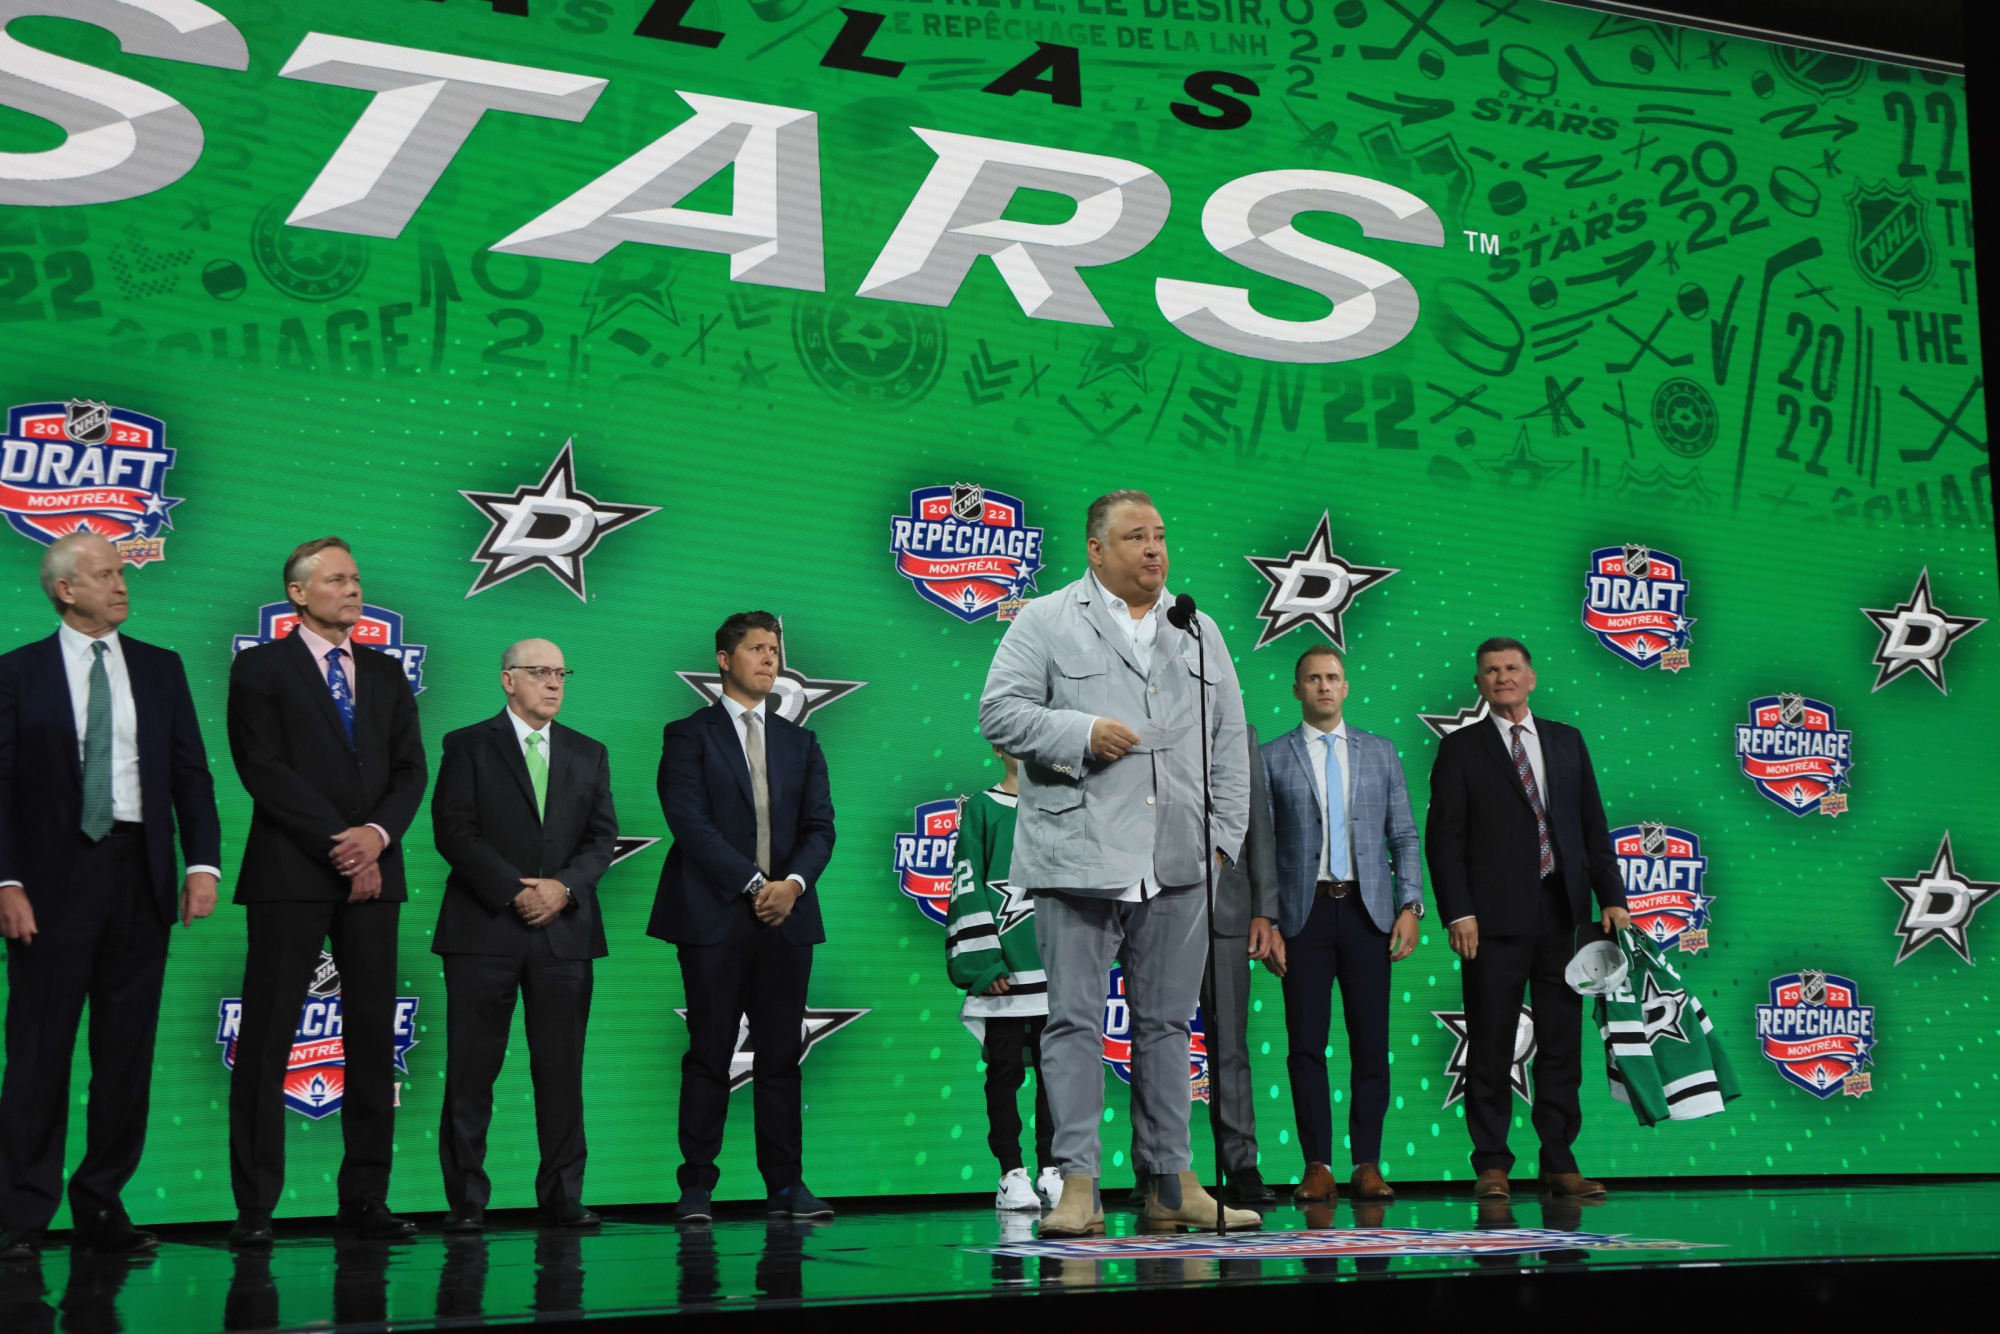 2023 NHL Draft 3 players the Dallas Stars could draft 61st overall